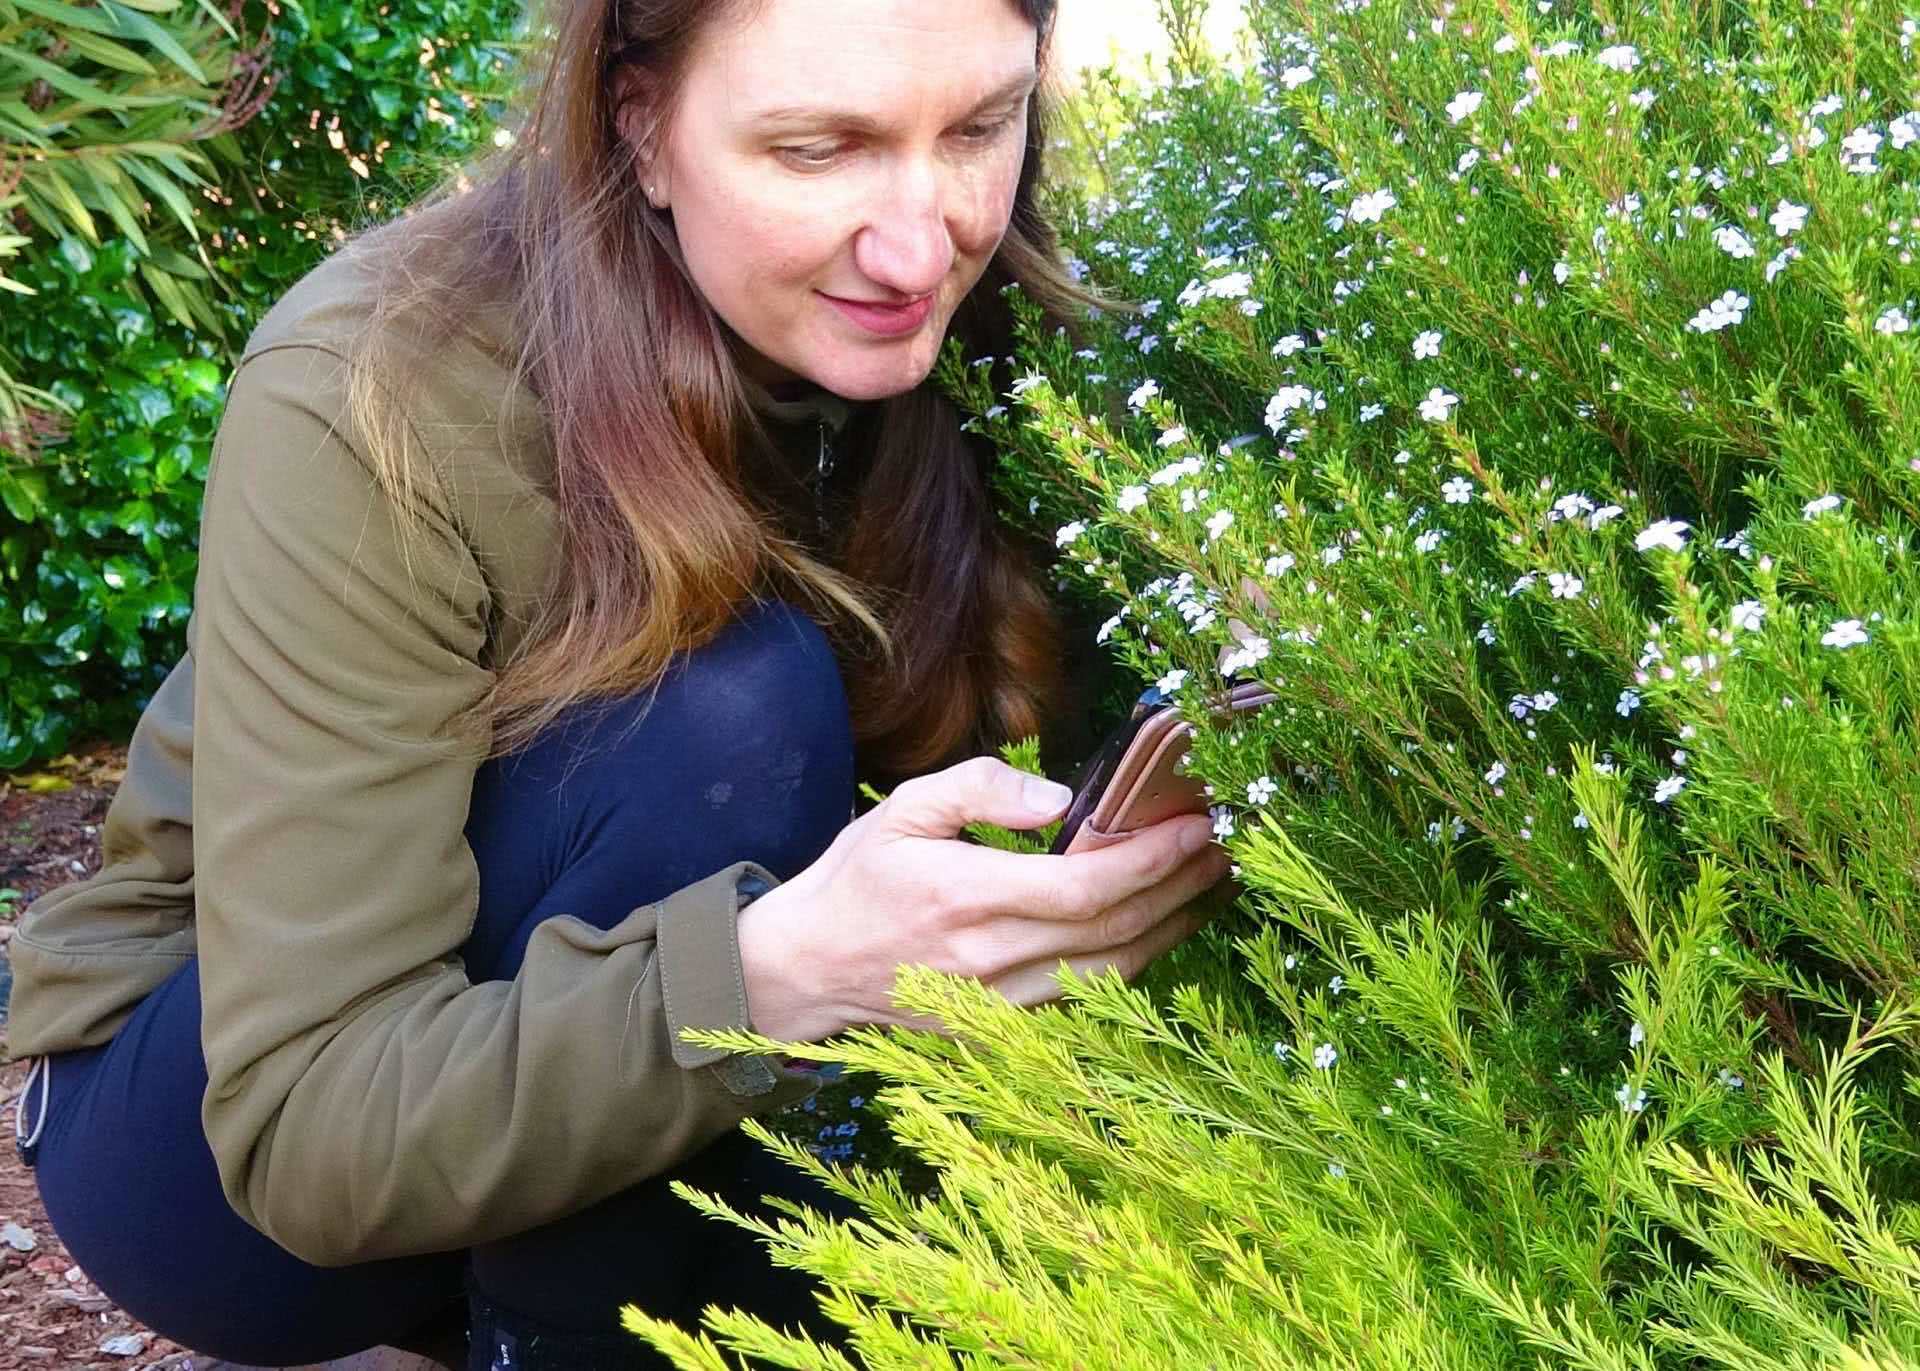 Expedition Anywhere: Explore The World With Citizen Science, Lynette Plenderleith, flowers, backyard, woman, phone